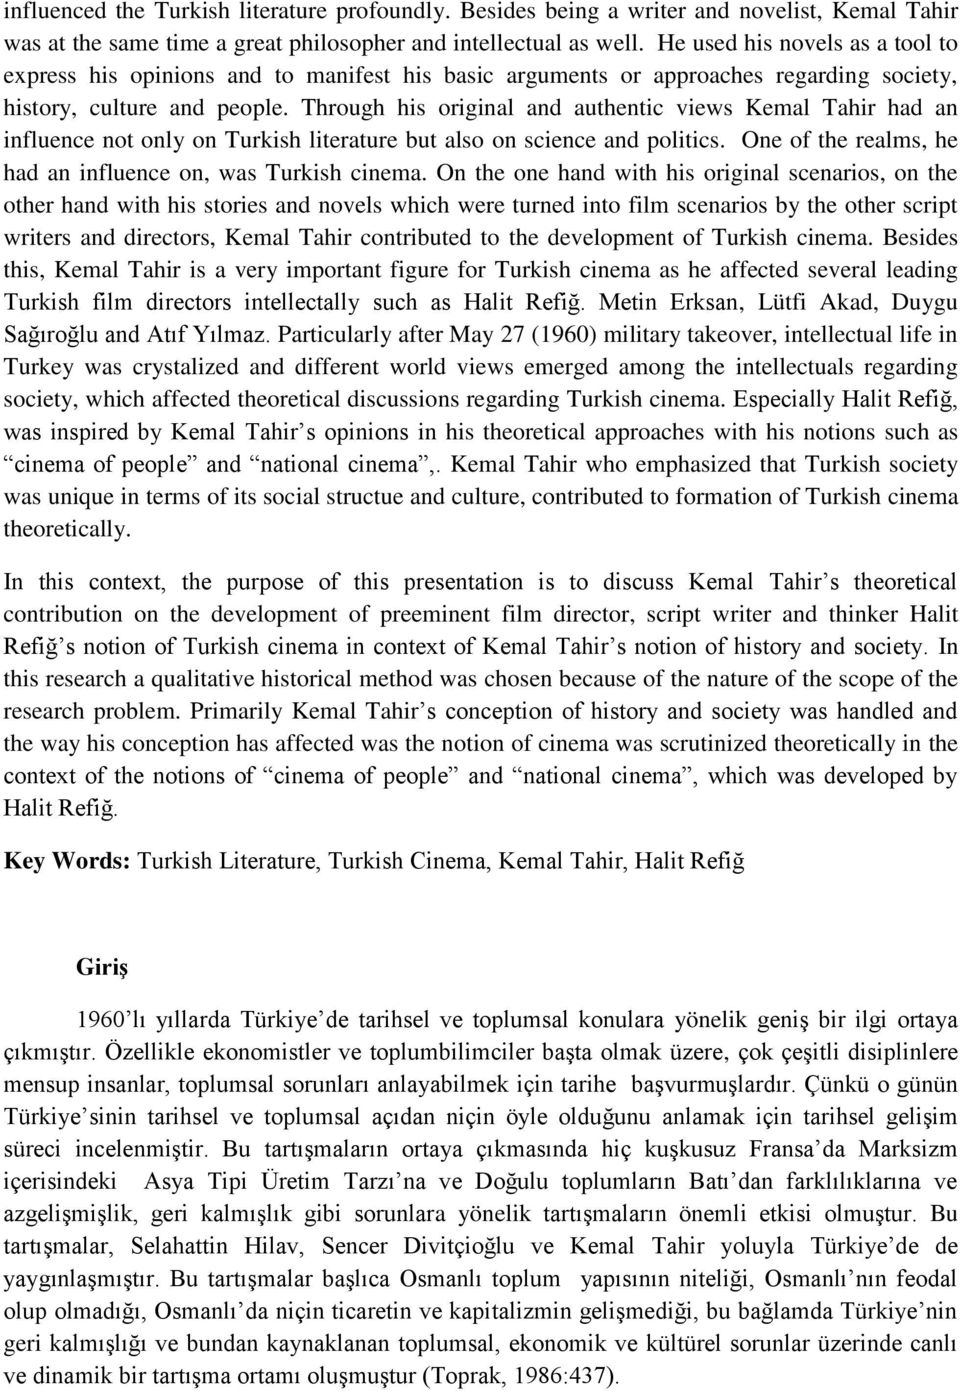 Through his original and authentic views Kemal Tahir had an influence not only on Turkish literature but also on science and politics. One of the realms, he had an influence on, was Turkish cinema.